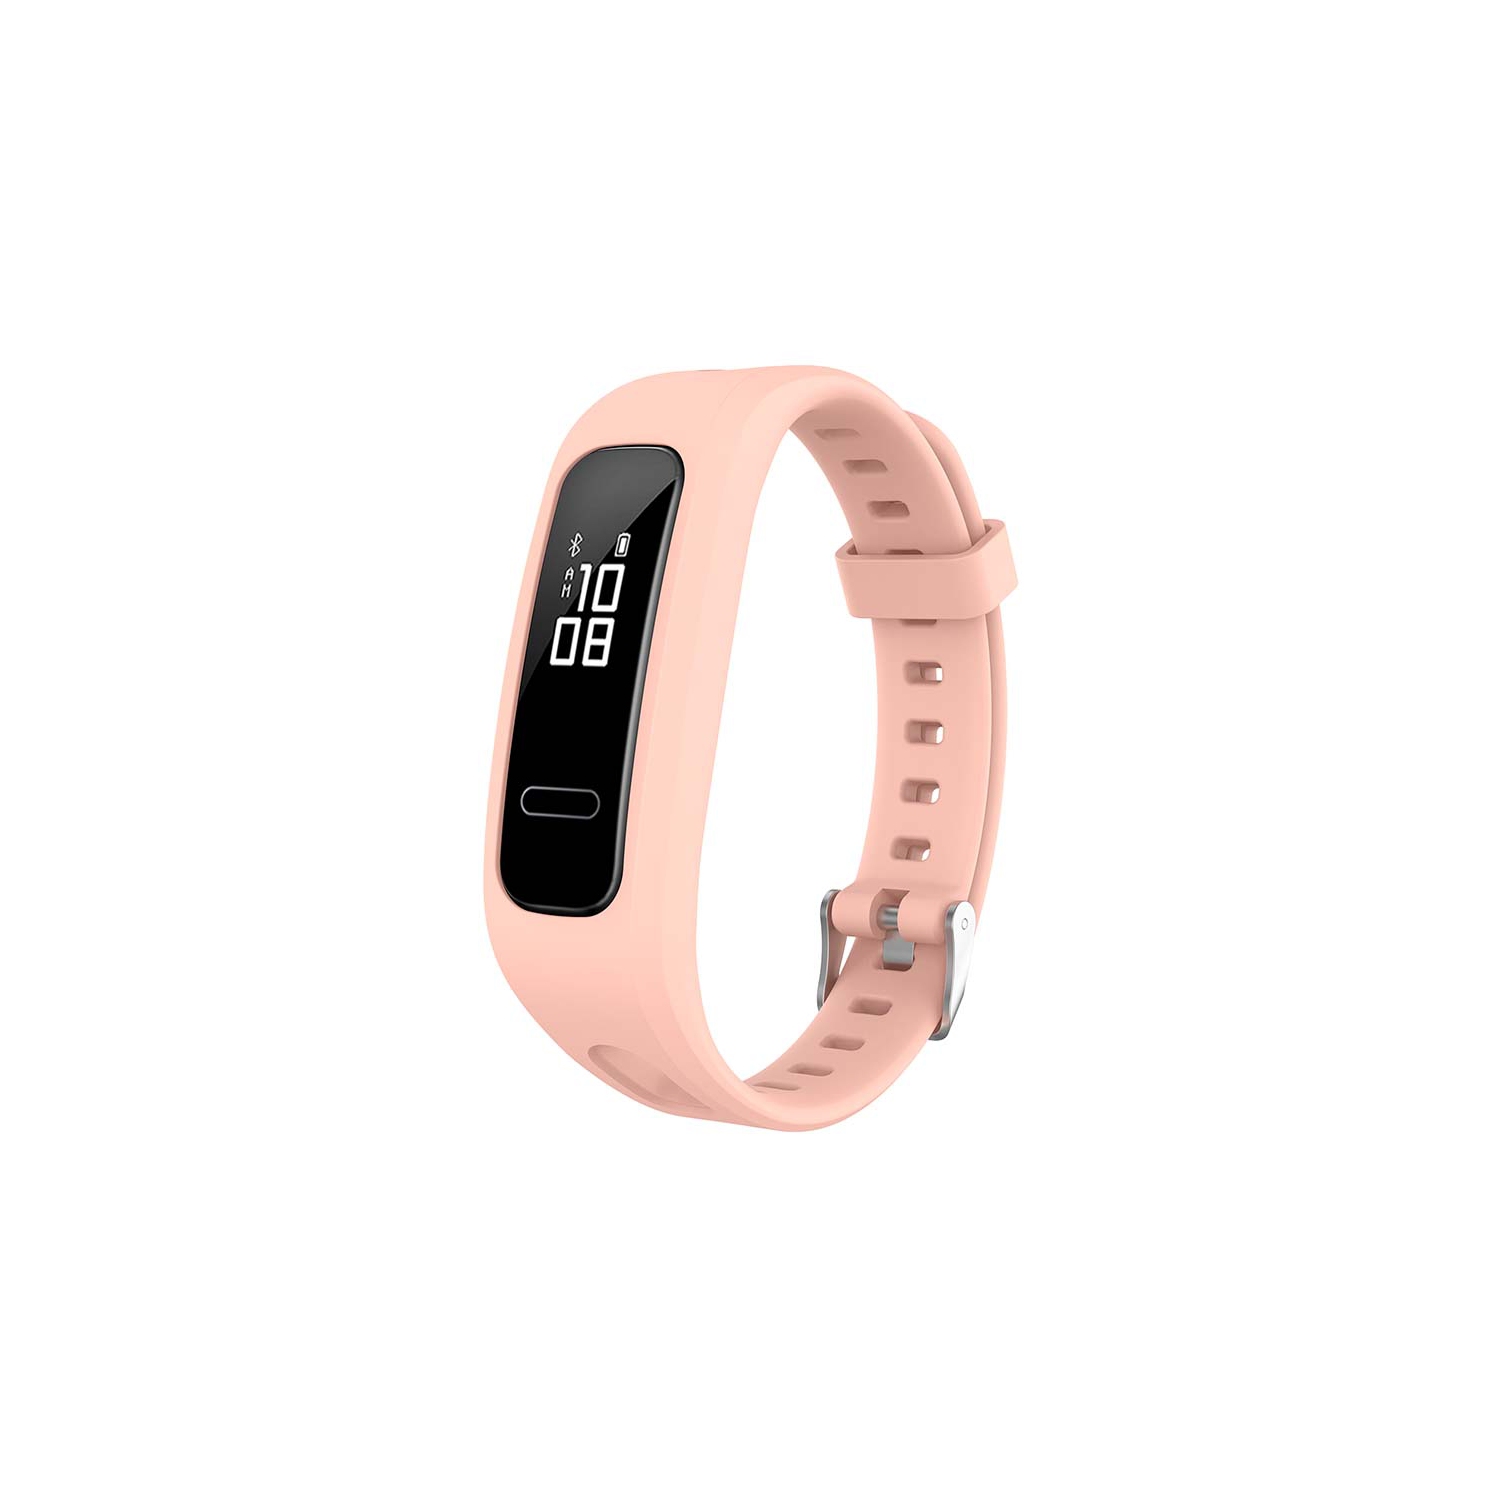 StrapsCo Silicone Rubber Watch Band Strap for Huawei Honor Band 4 Running Edition / 4e / 3e - Pink